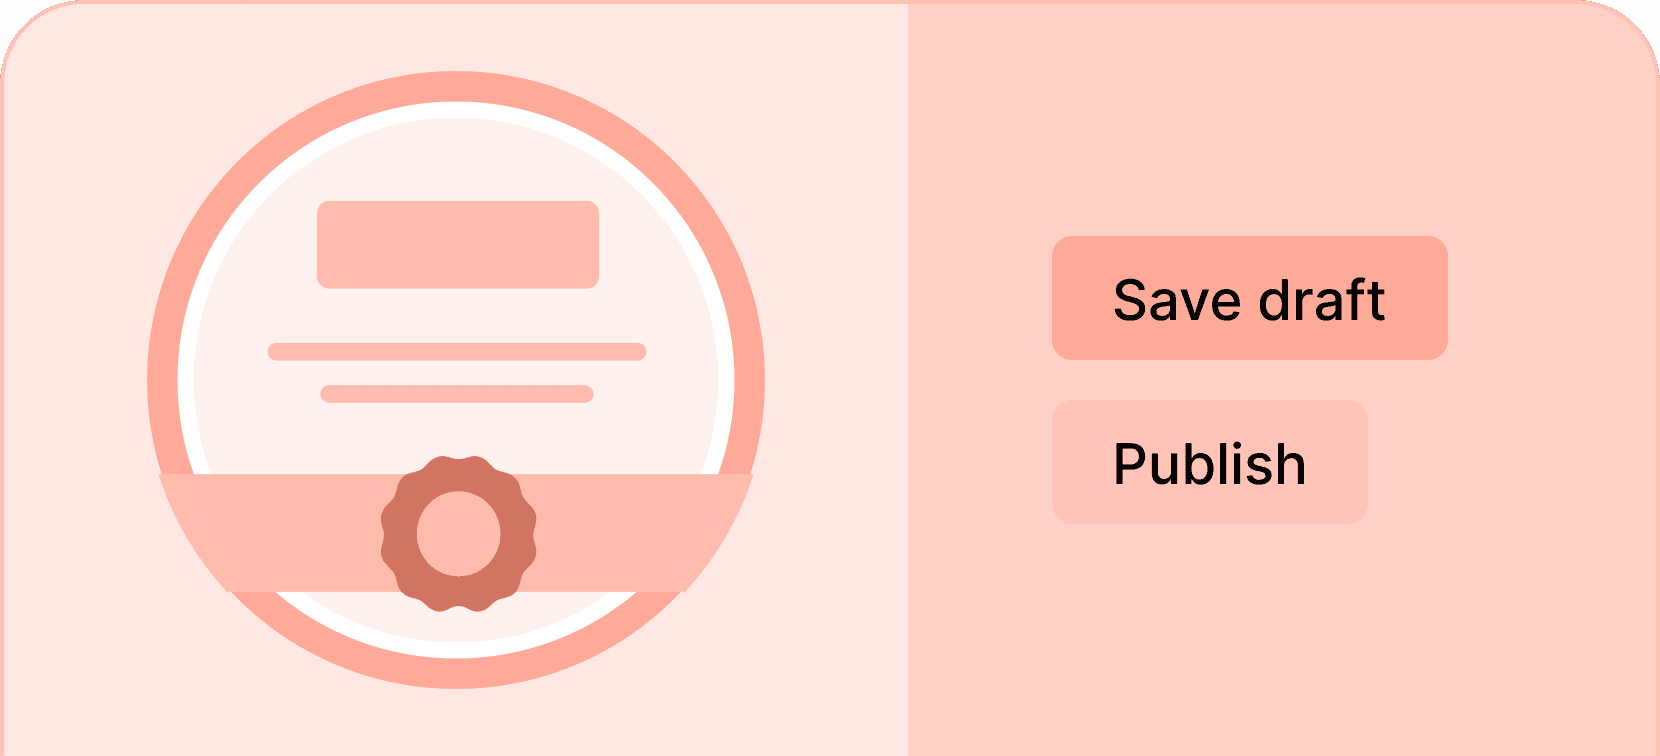 Save unfinished documents - Certifier features